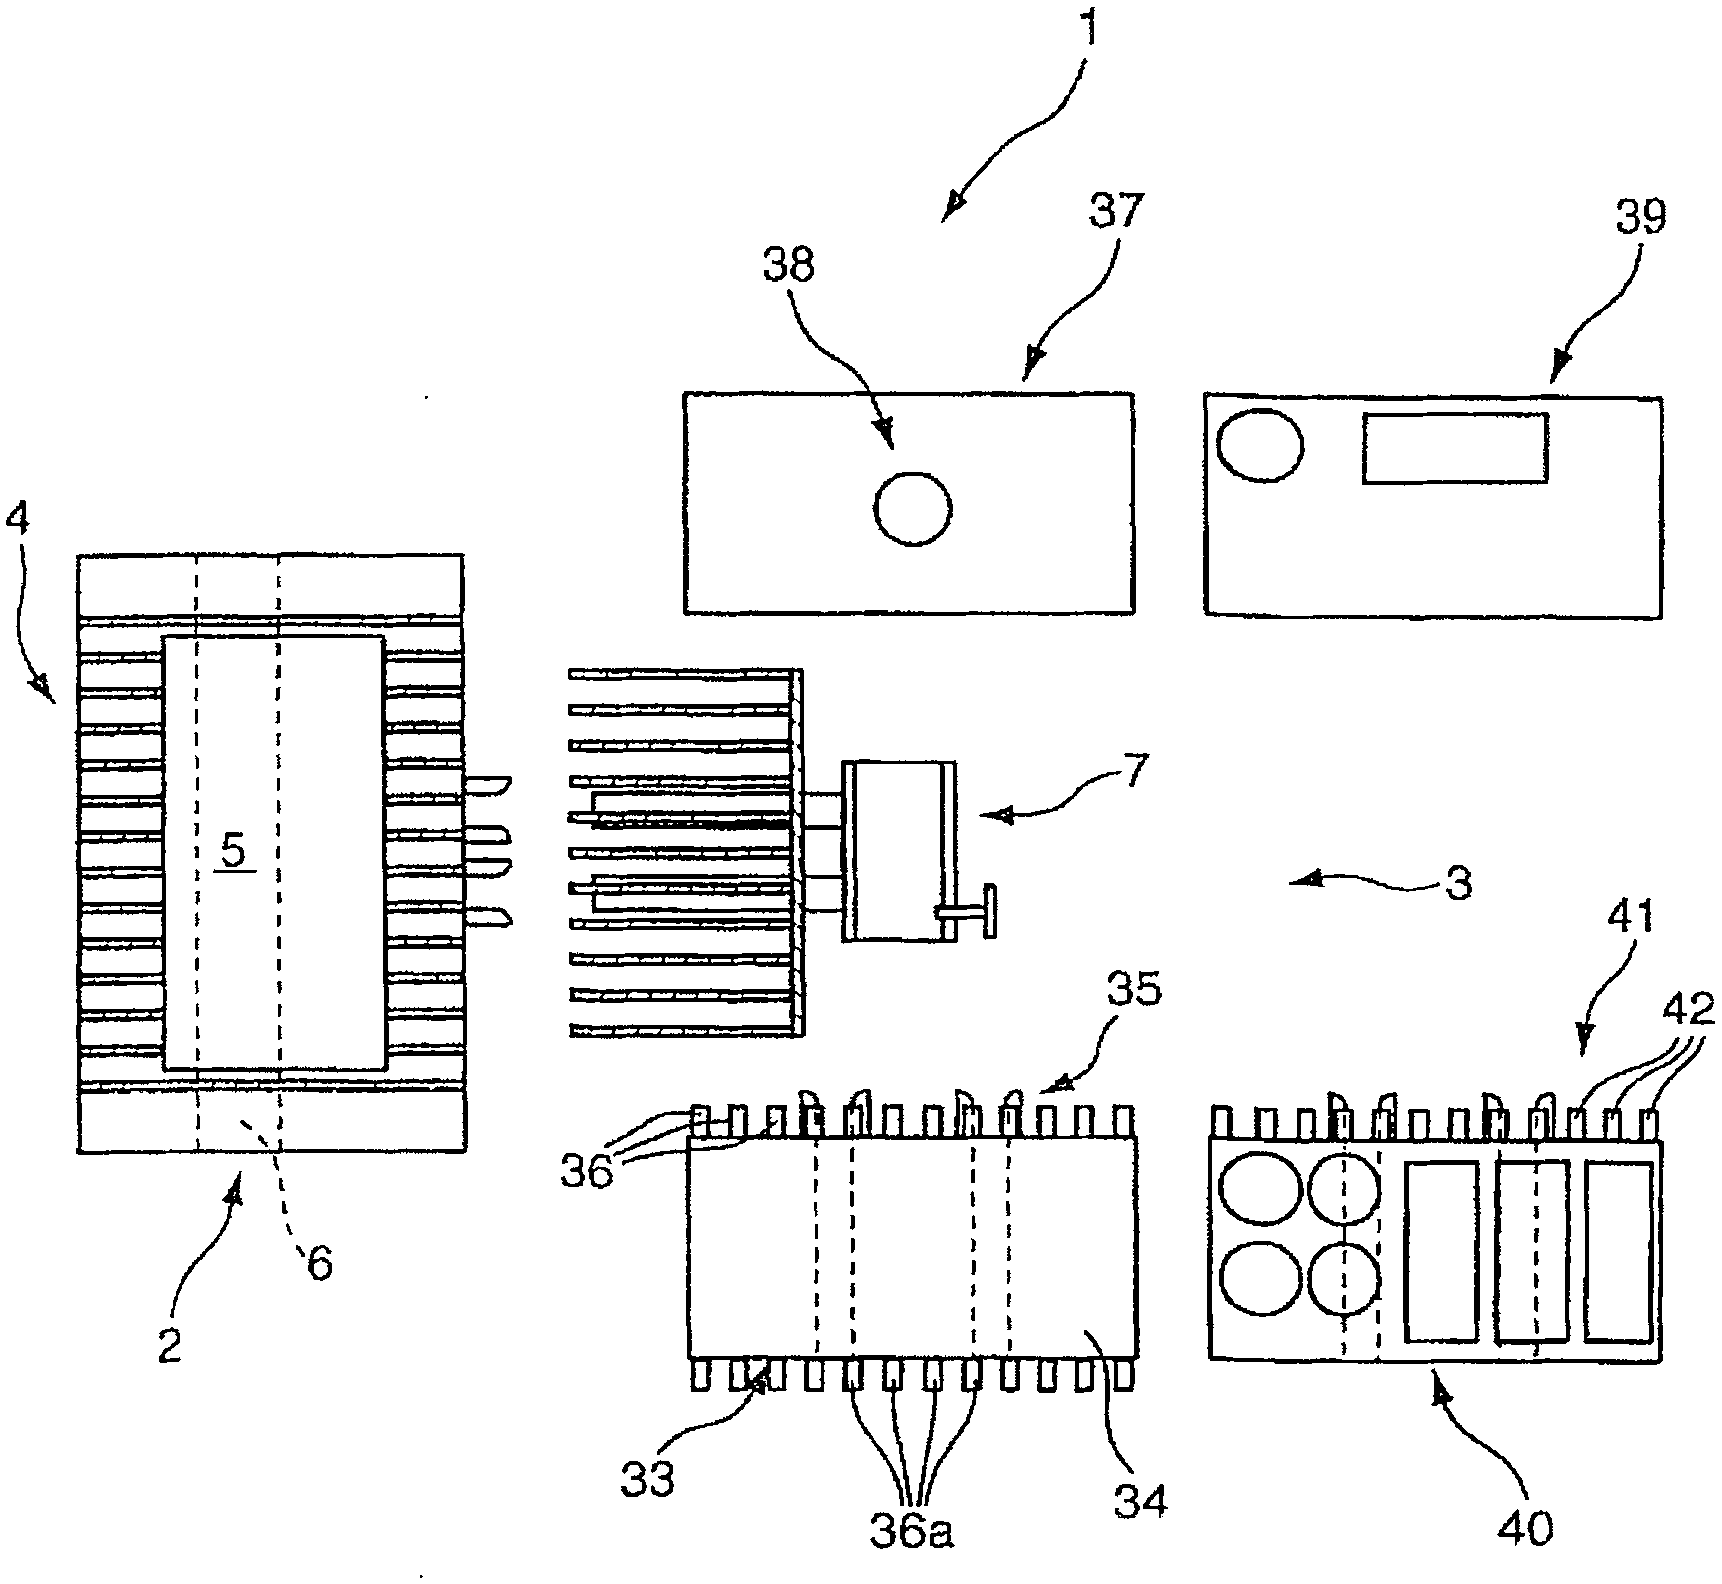 Mechanical device for conveying workpieces of machine tool, pavement conveying device and method, and workpiece support used for machine tool